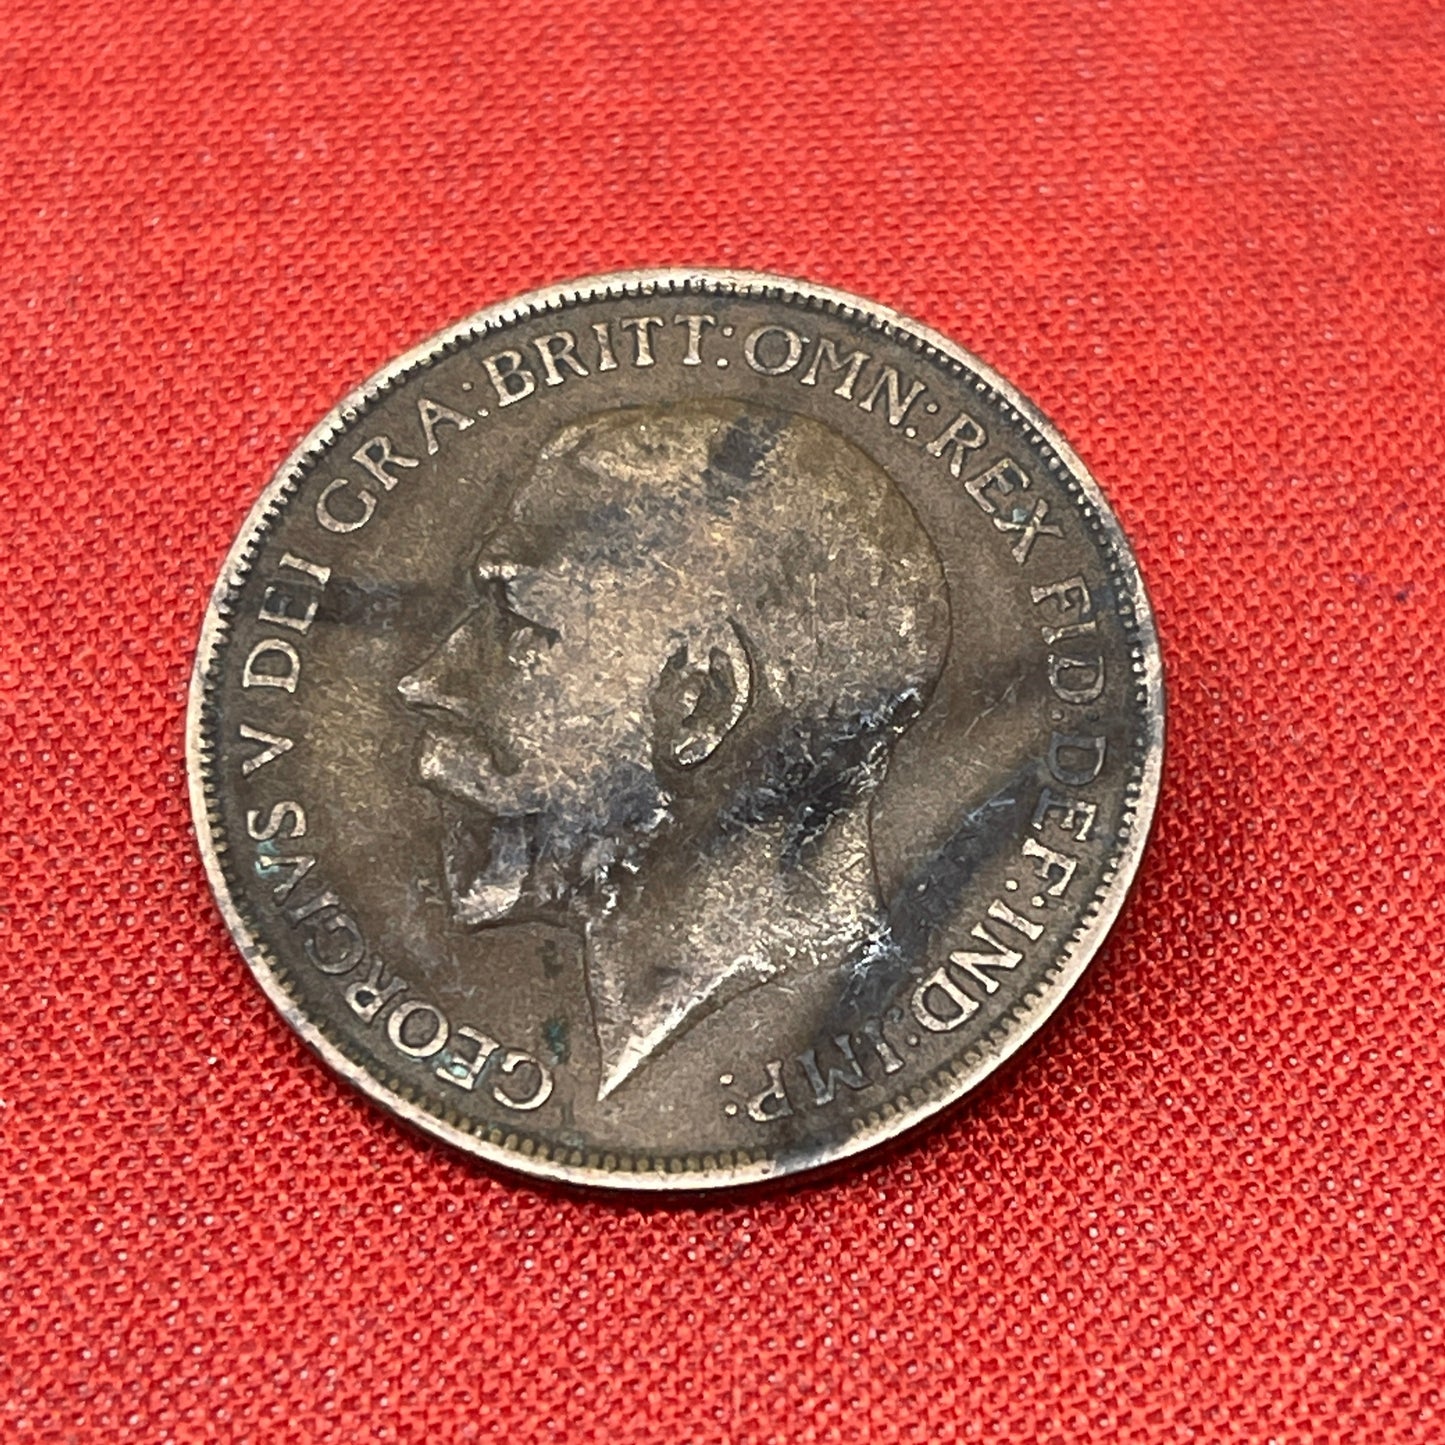 On the obverse side of the coin, you will find a portrait of King George V facing left, accompanied by the inscription "GEORGIVS V DEI GRA BRITT OMN REX FID DEF IND IMP." This Latin inscription translates to "George V by the Grace of God, King of all the Britains, Defender of the Faith, Emperor of India." The reverse side features the denomination "ONE PENNY and the year of minting.